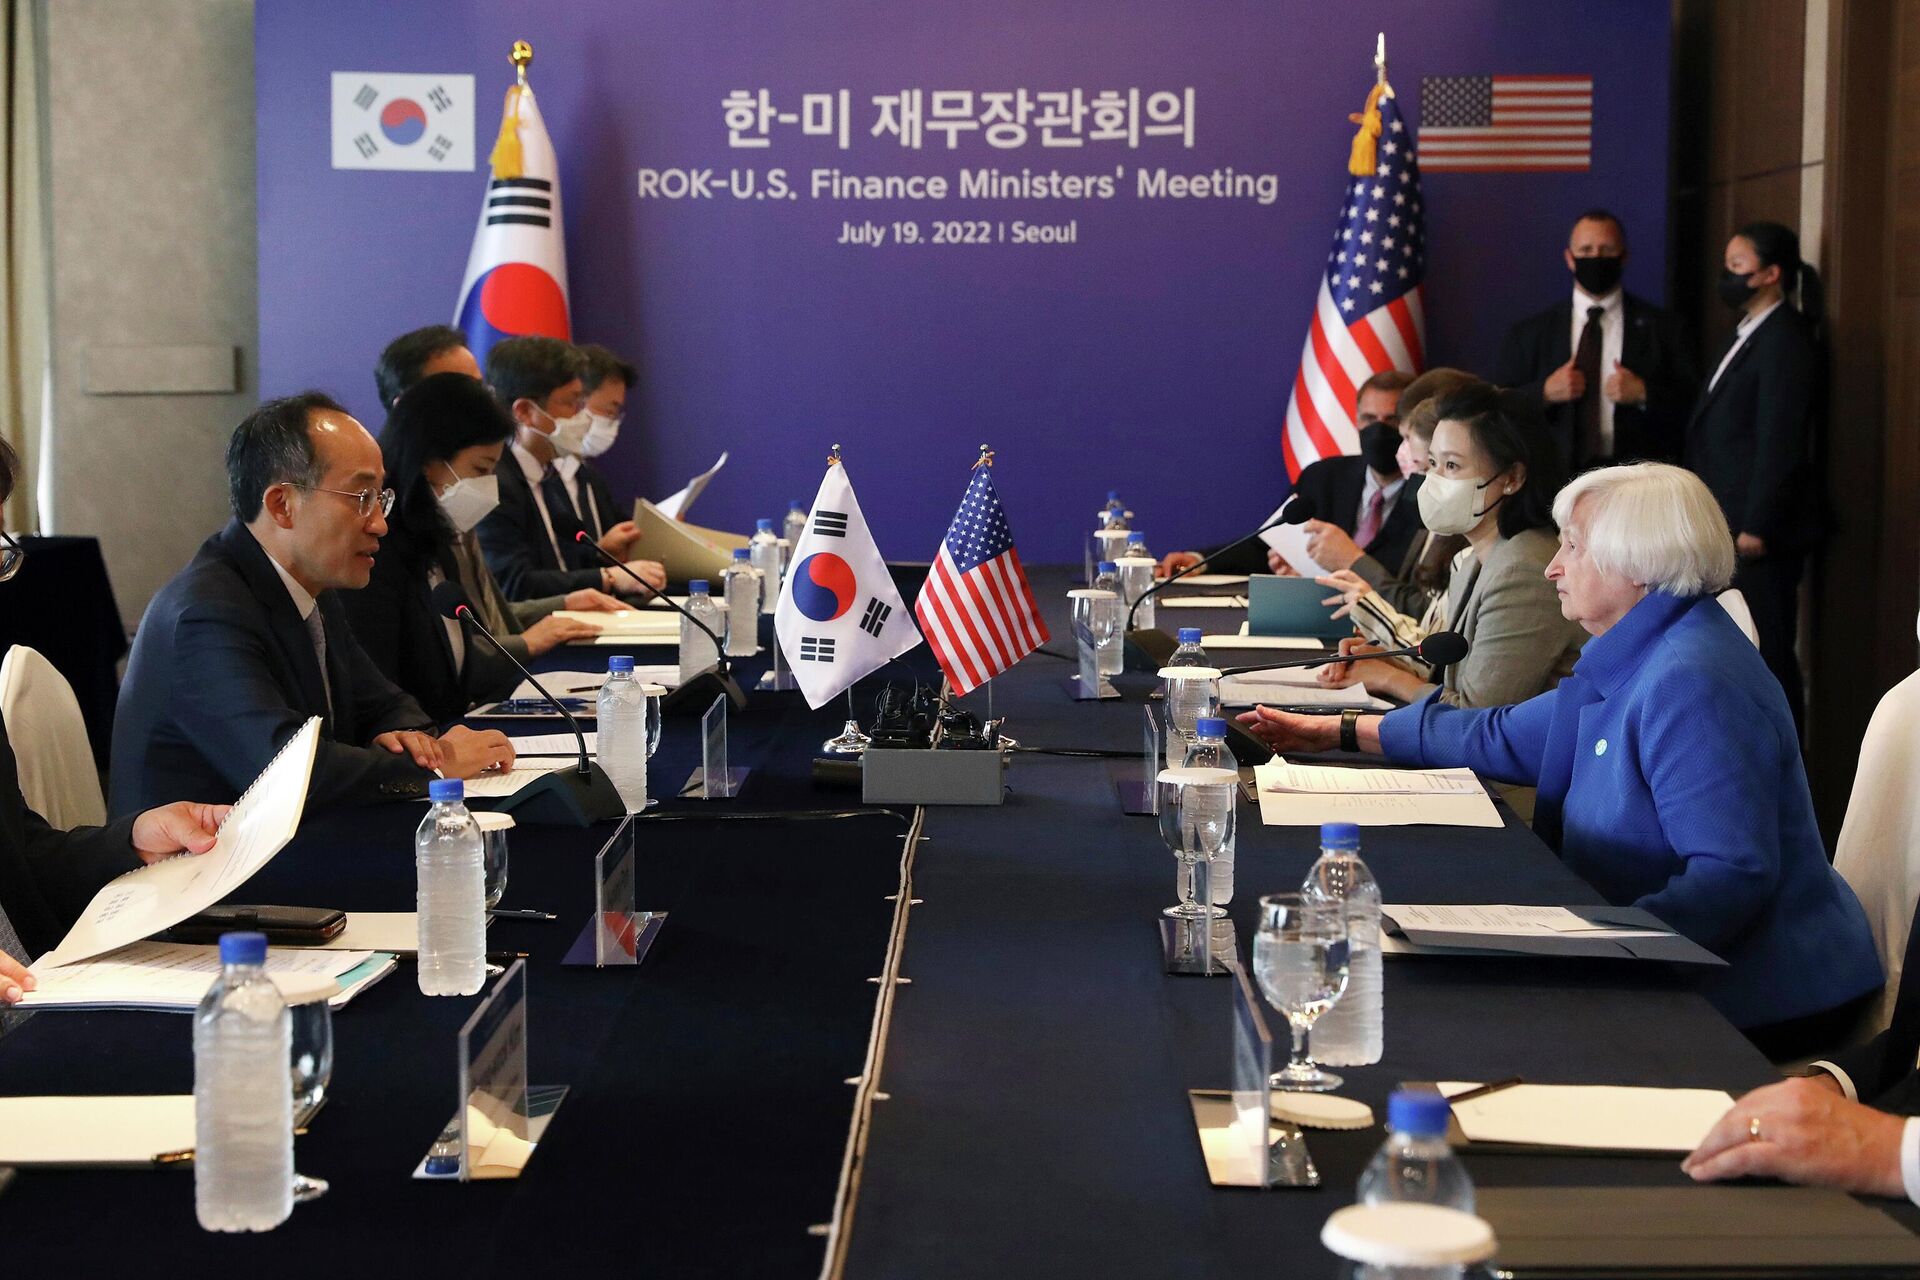 U.S. Treasury Secretary Janet Yellen, right, talks with South Korean Deputy Prime Minister and Minister of Economy and Finance Choo Kyung-ho, left, at Lotte Hotel in Seoul, South Korea, Tuesday, July 19, 2022 - Sputnik International, 1920, 19.07.2022